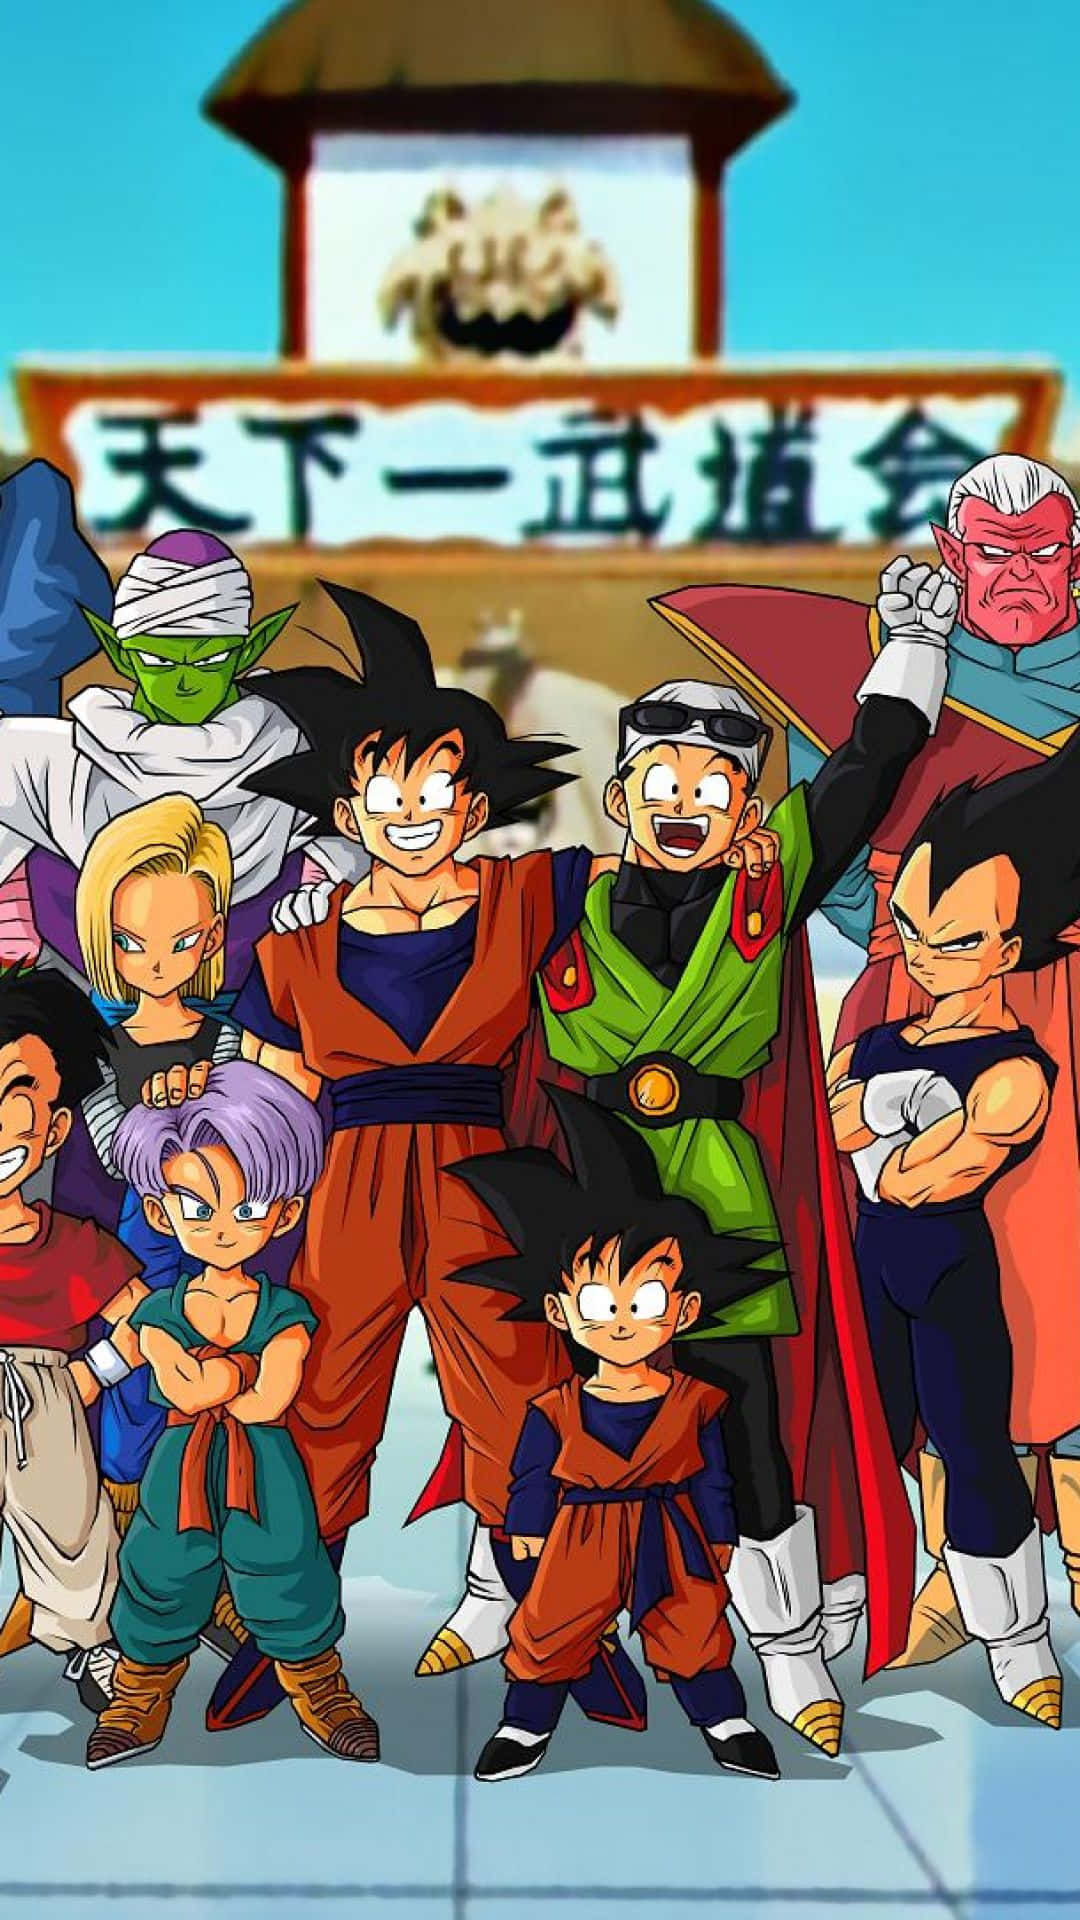 Get Ready to Play Dragon Ball Z on Your Phone! Wallpaper